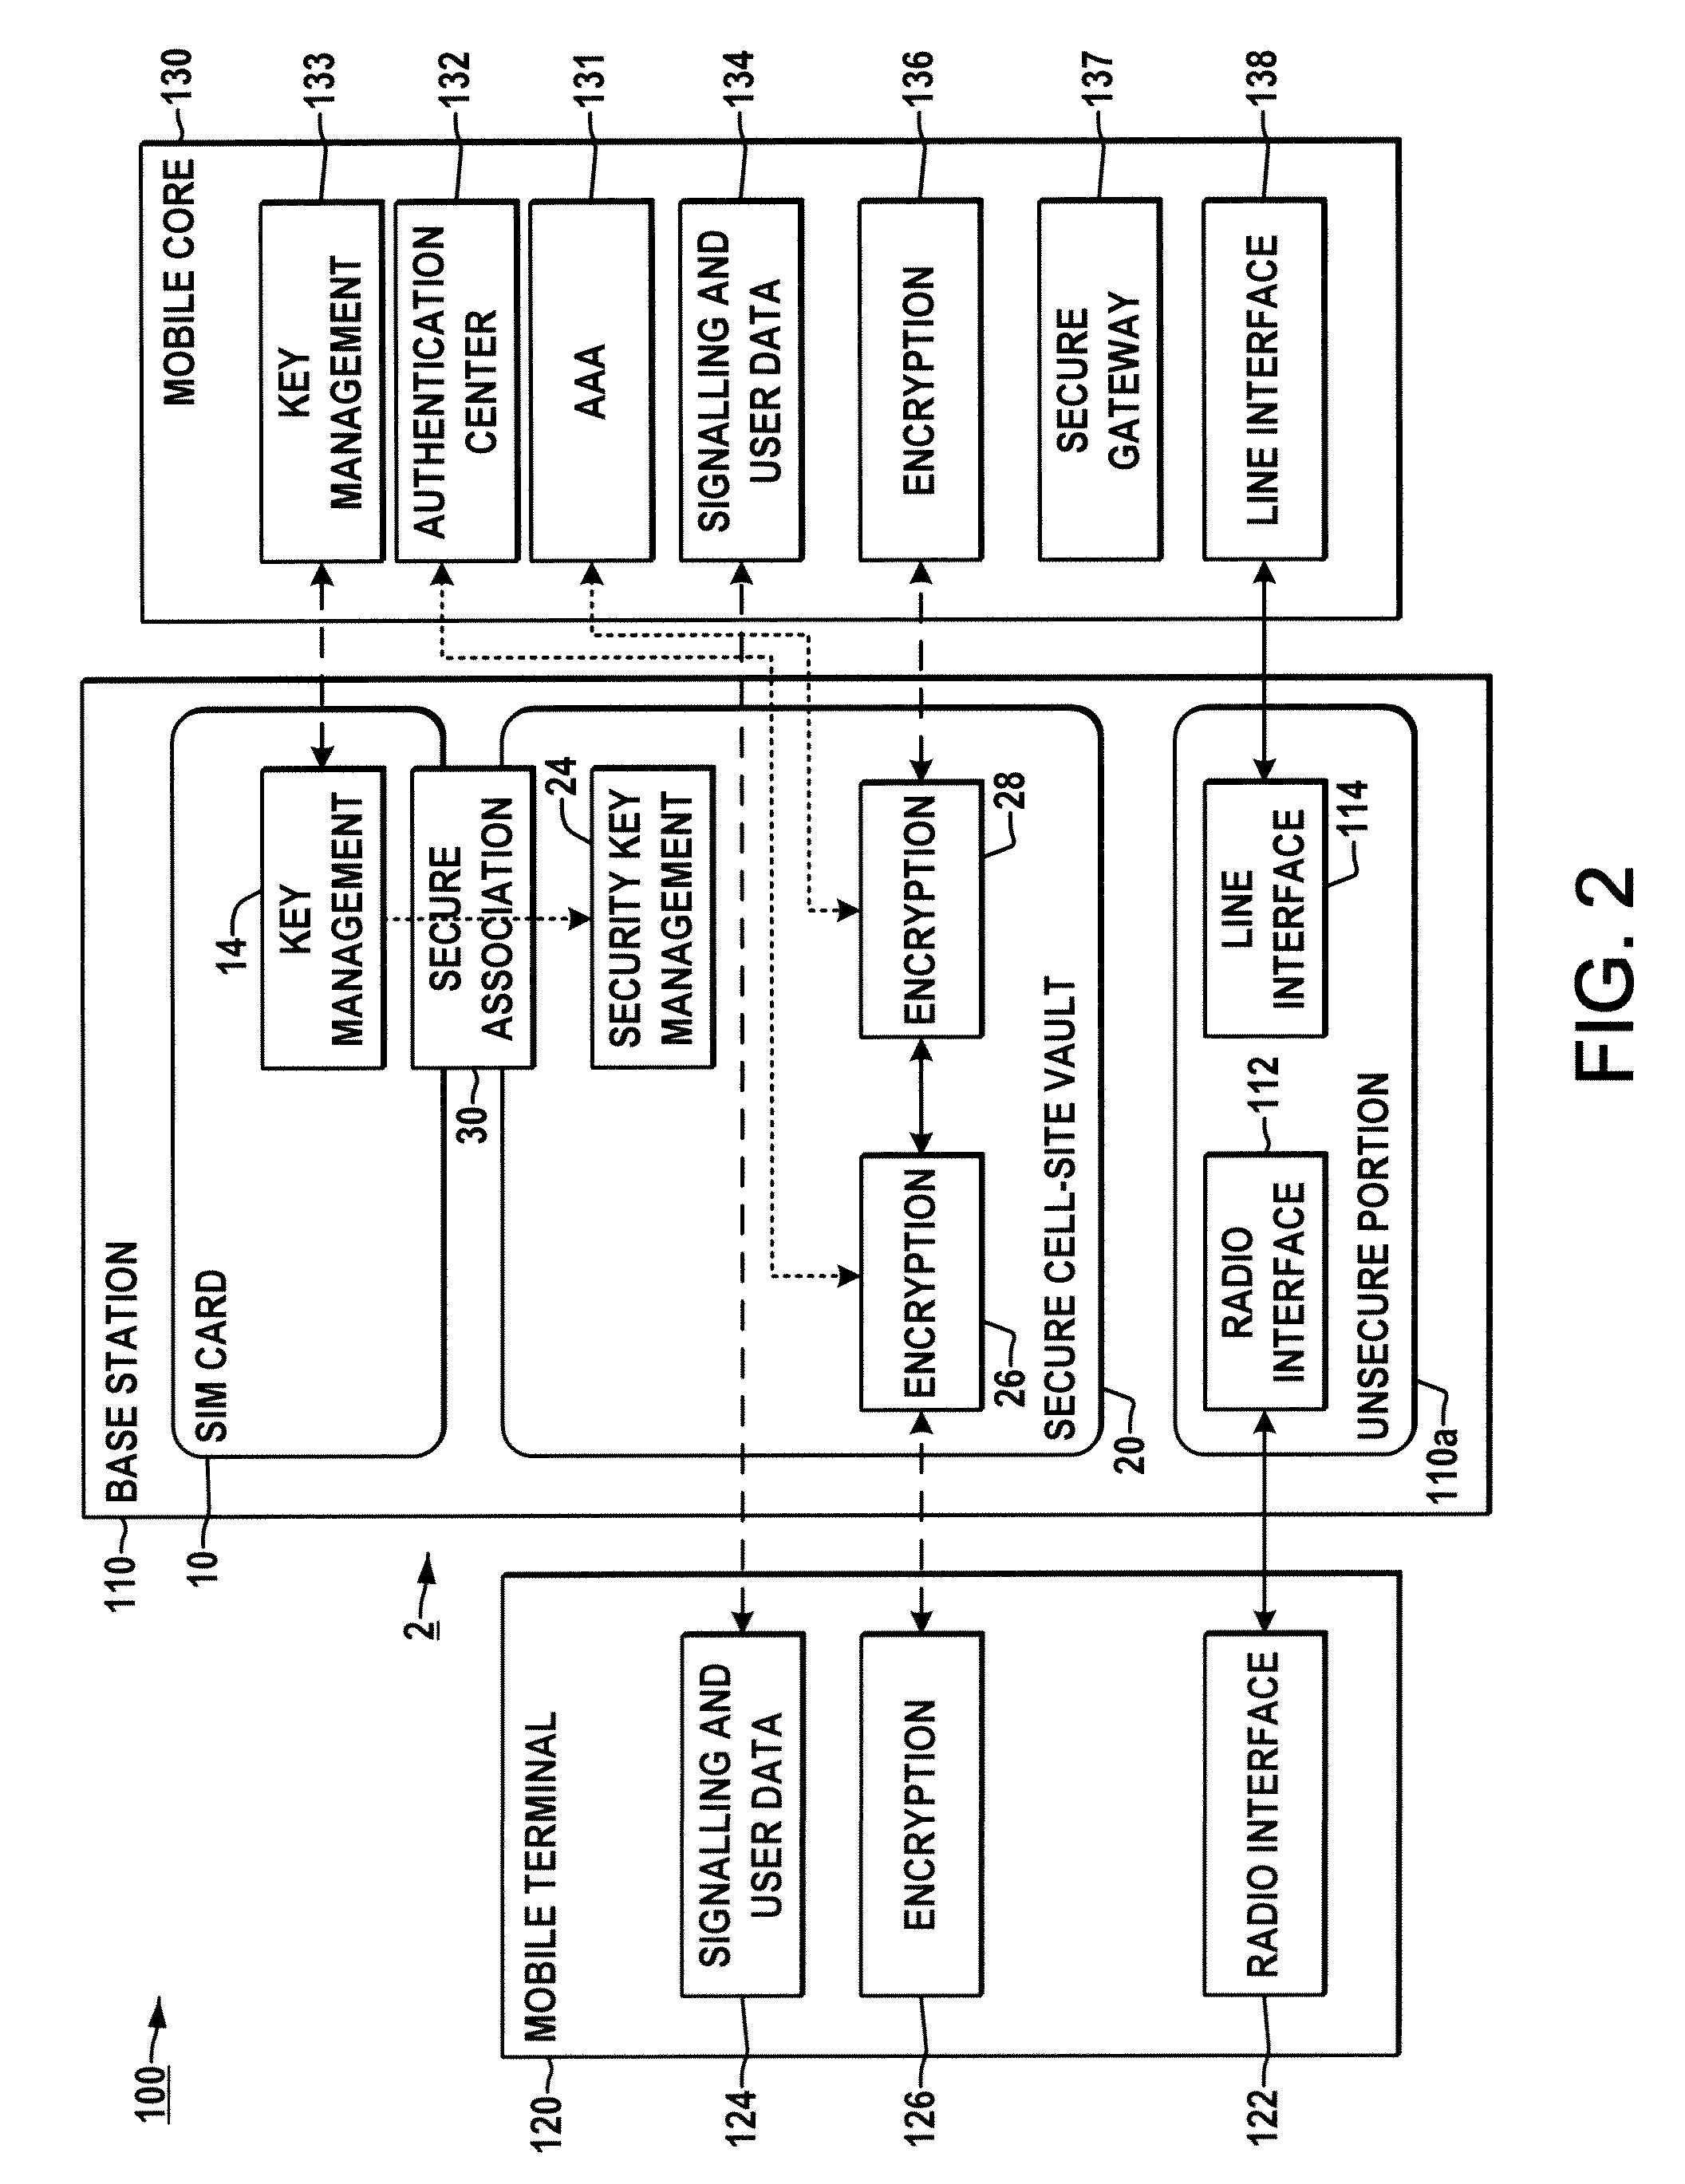 System and method for securing a base station using SIM cards